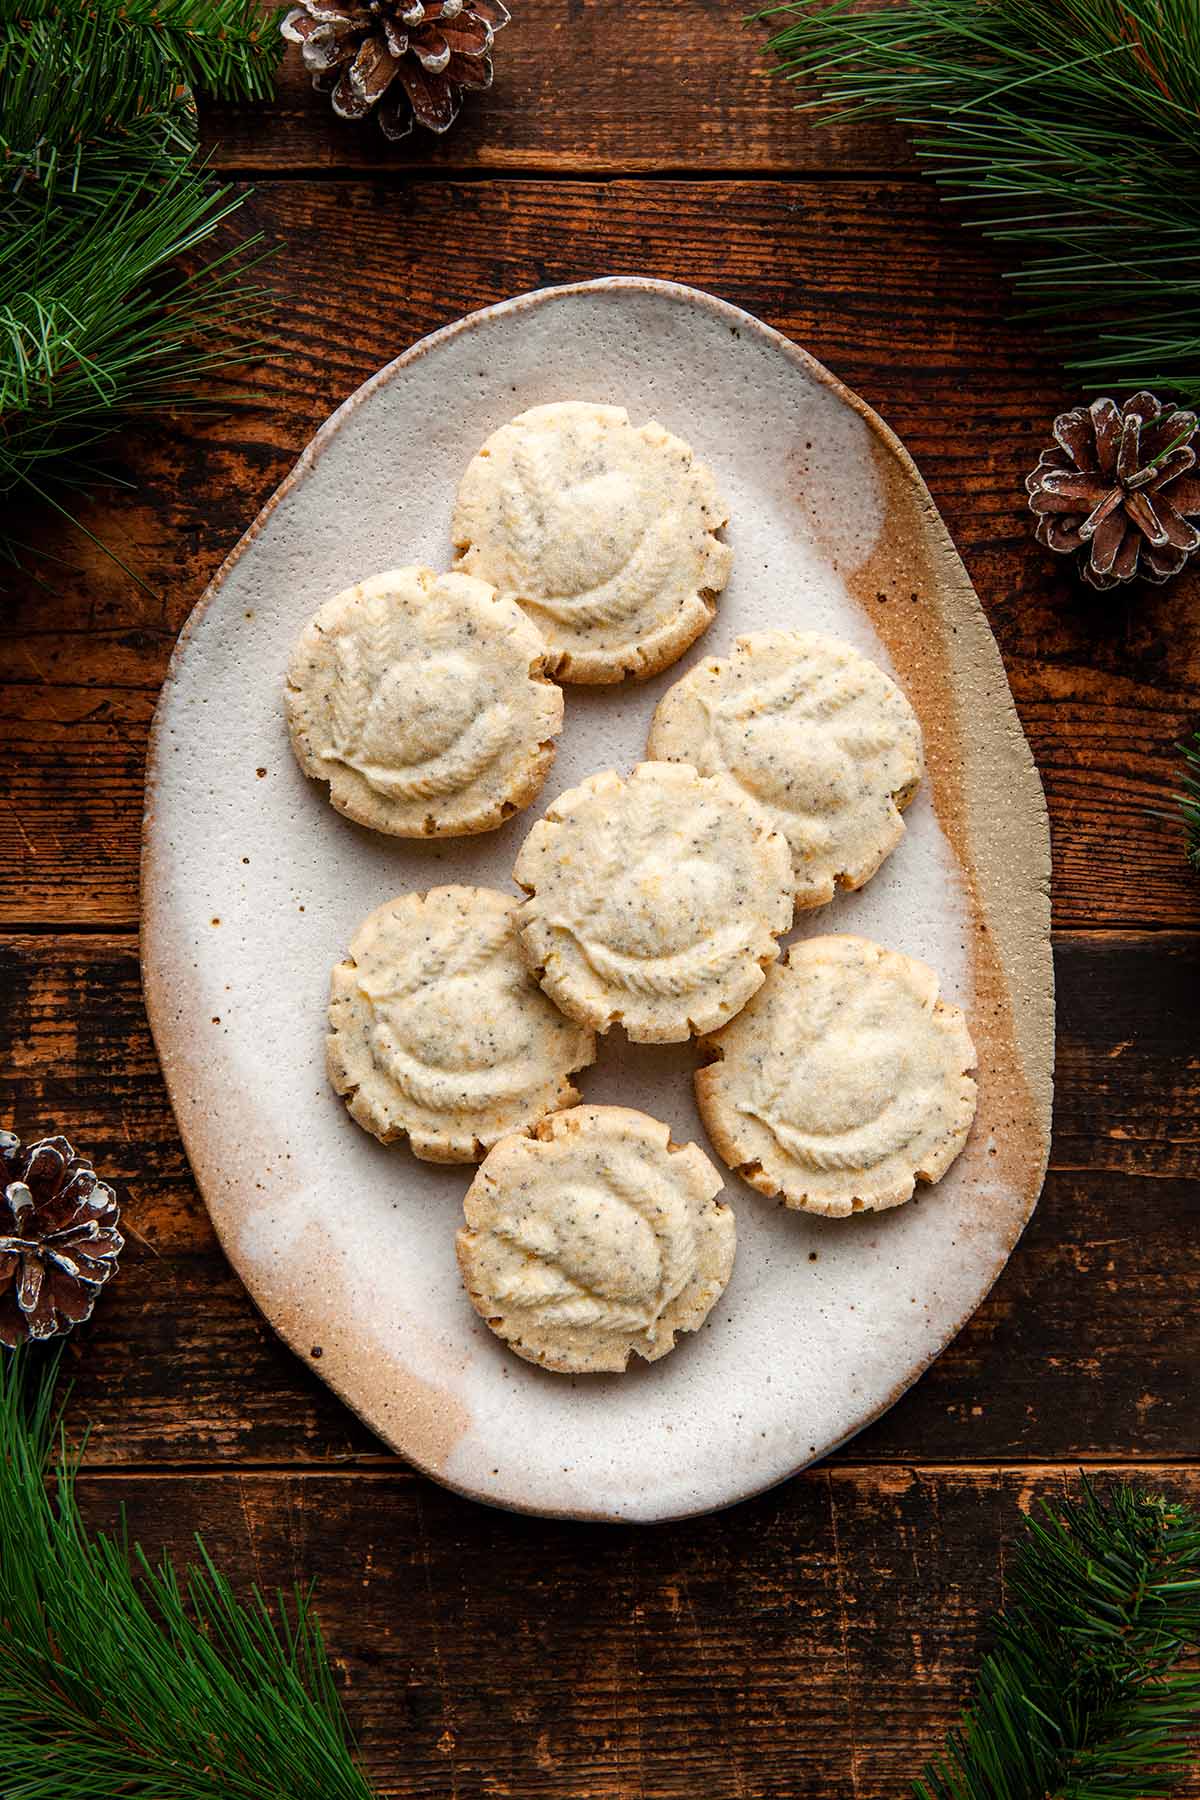 A small platter of lemon poppy seed shortbread cookies surrounded by evergreen branches and a few pine cones.